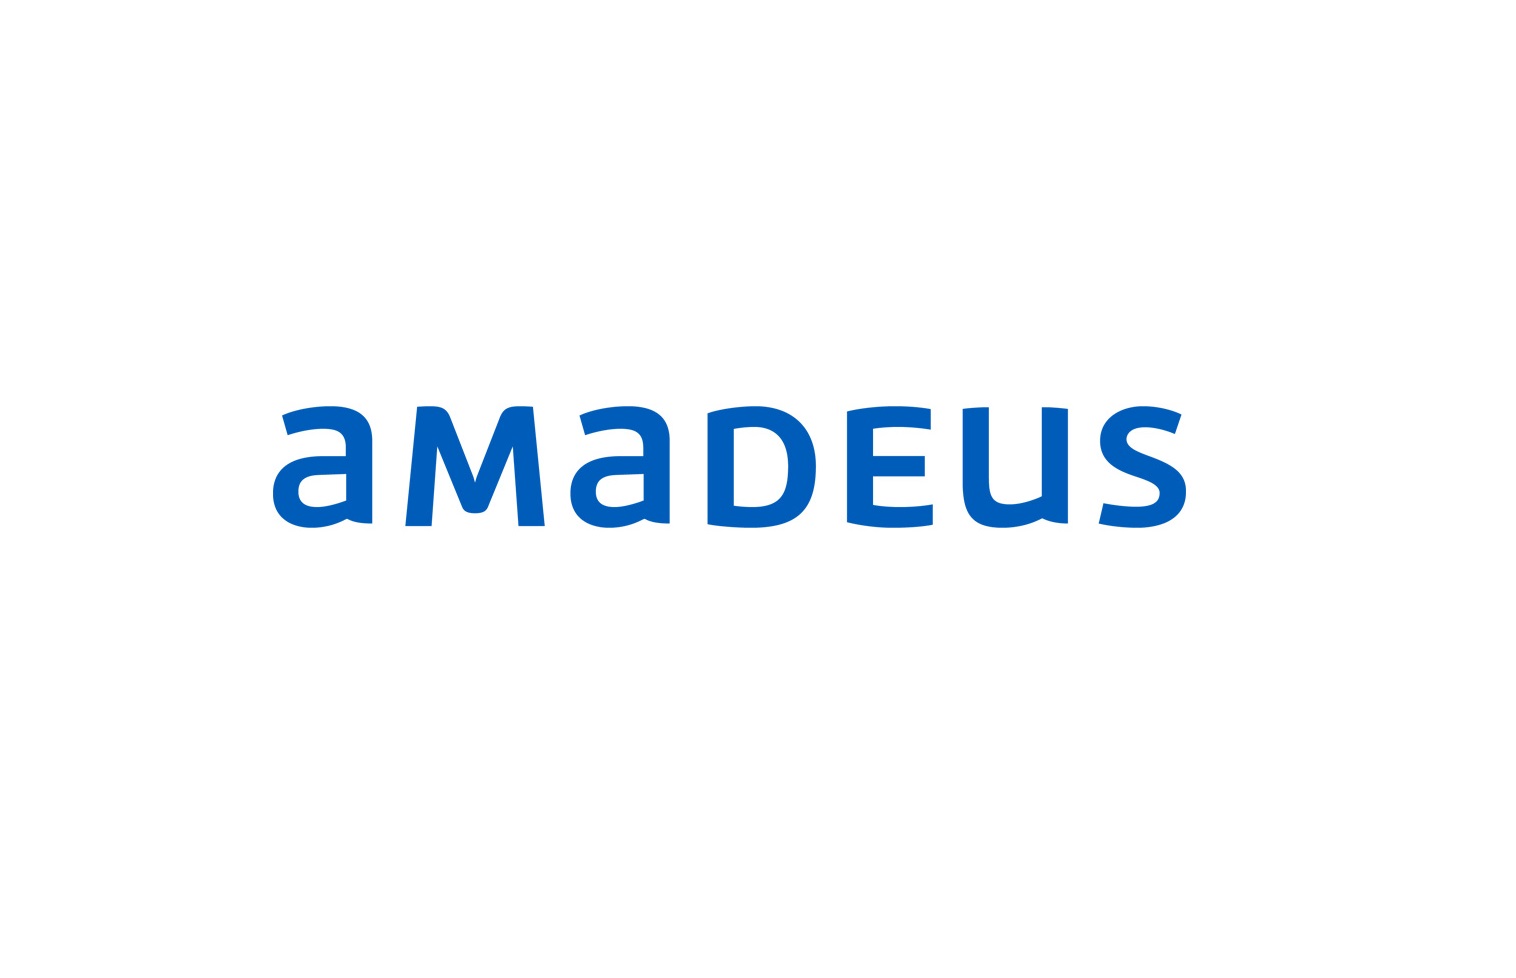 APAC hotel occupancy moves towards recovery with a strong outlook for Q4: Amadeus’ Demand360 data